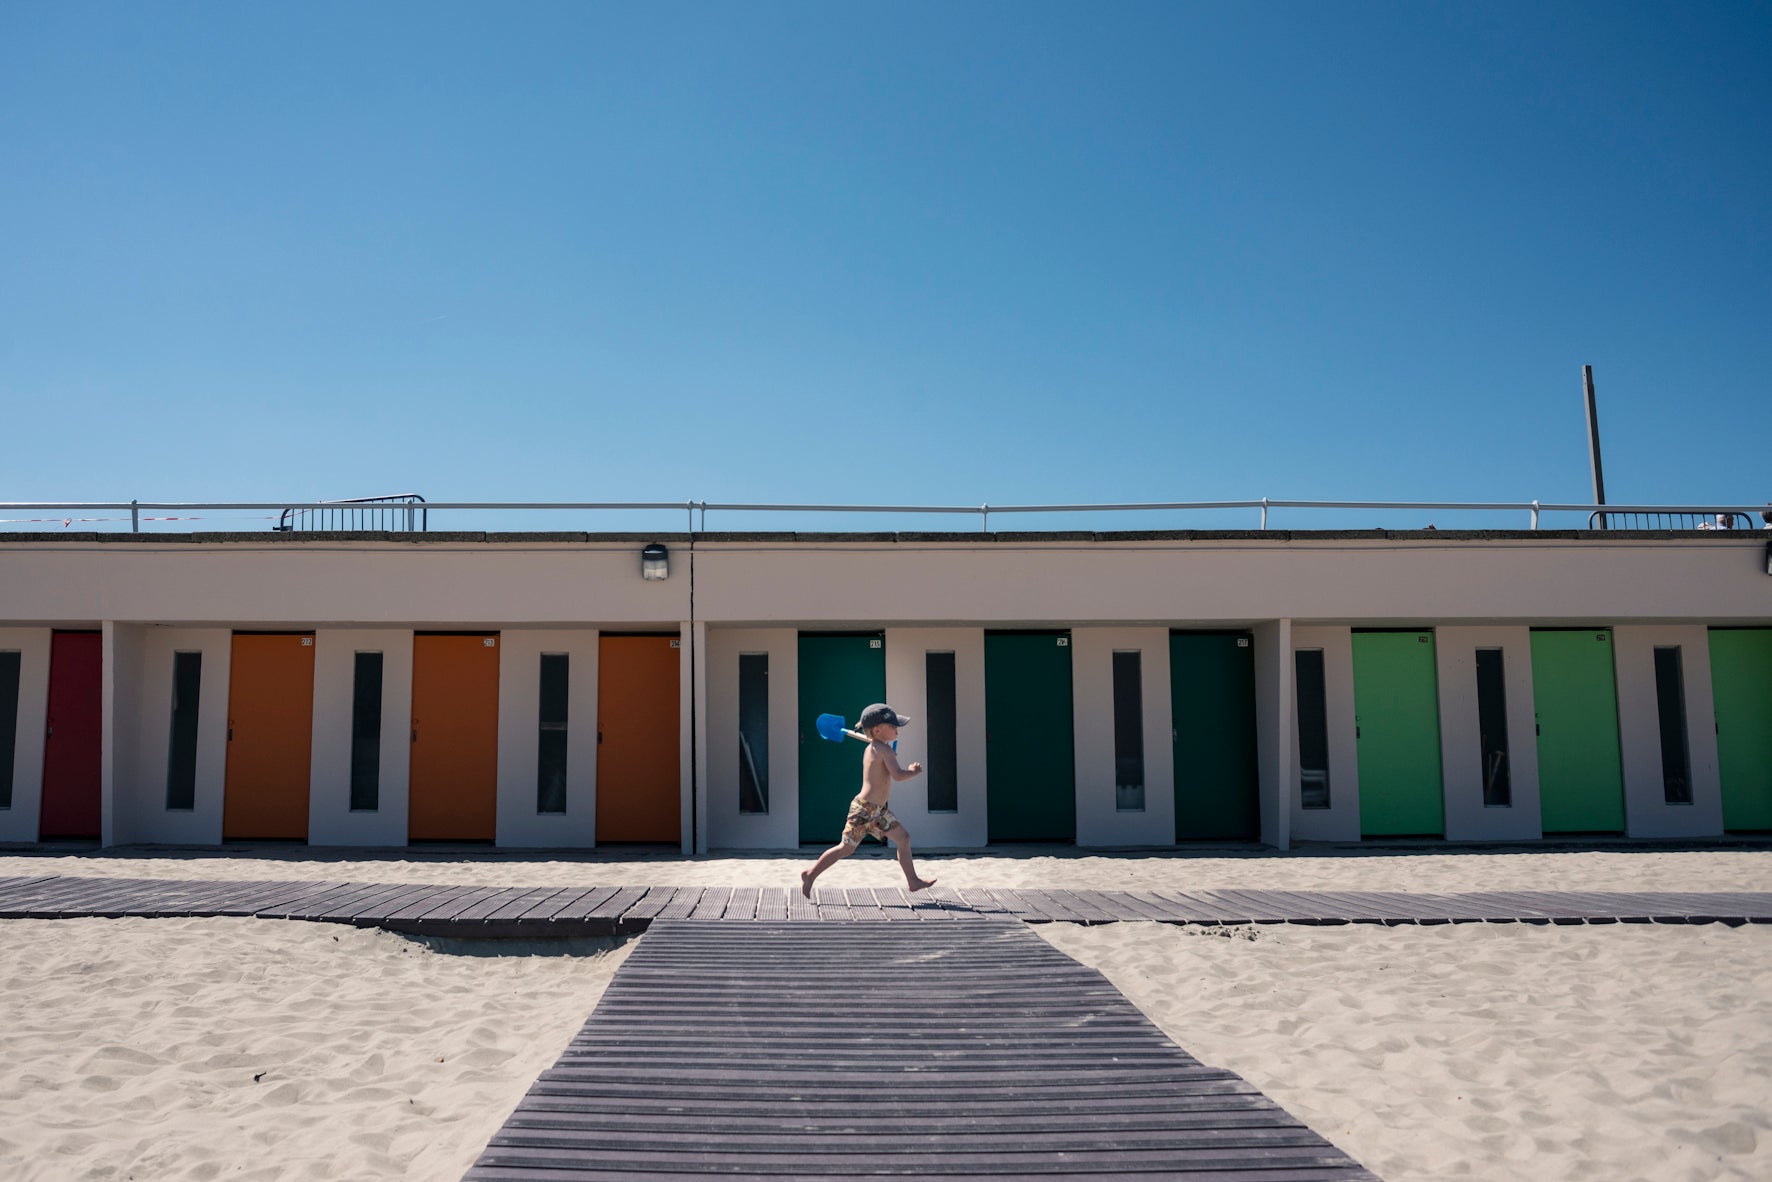 Colourful changing rooms on Le Touquet’s beach